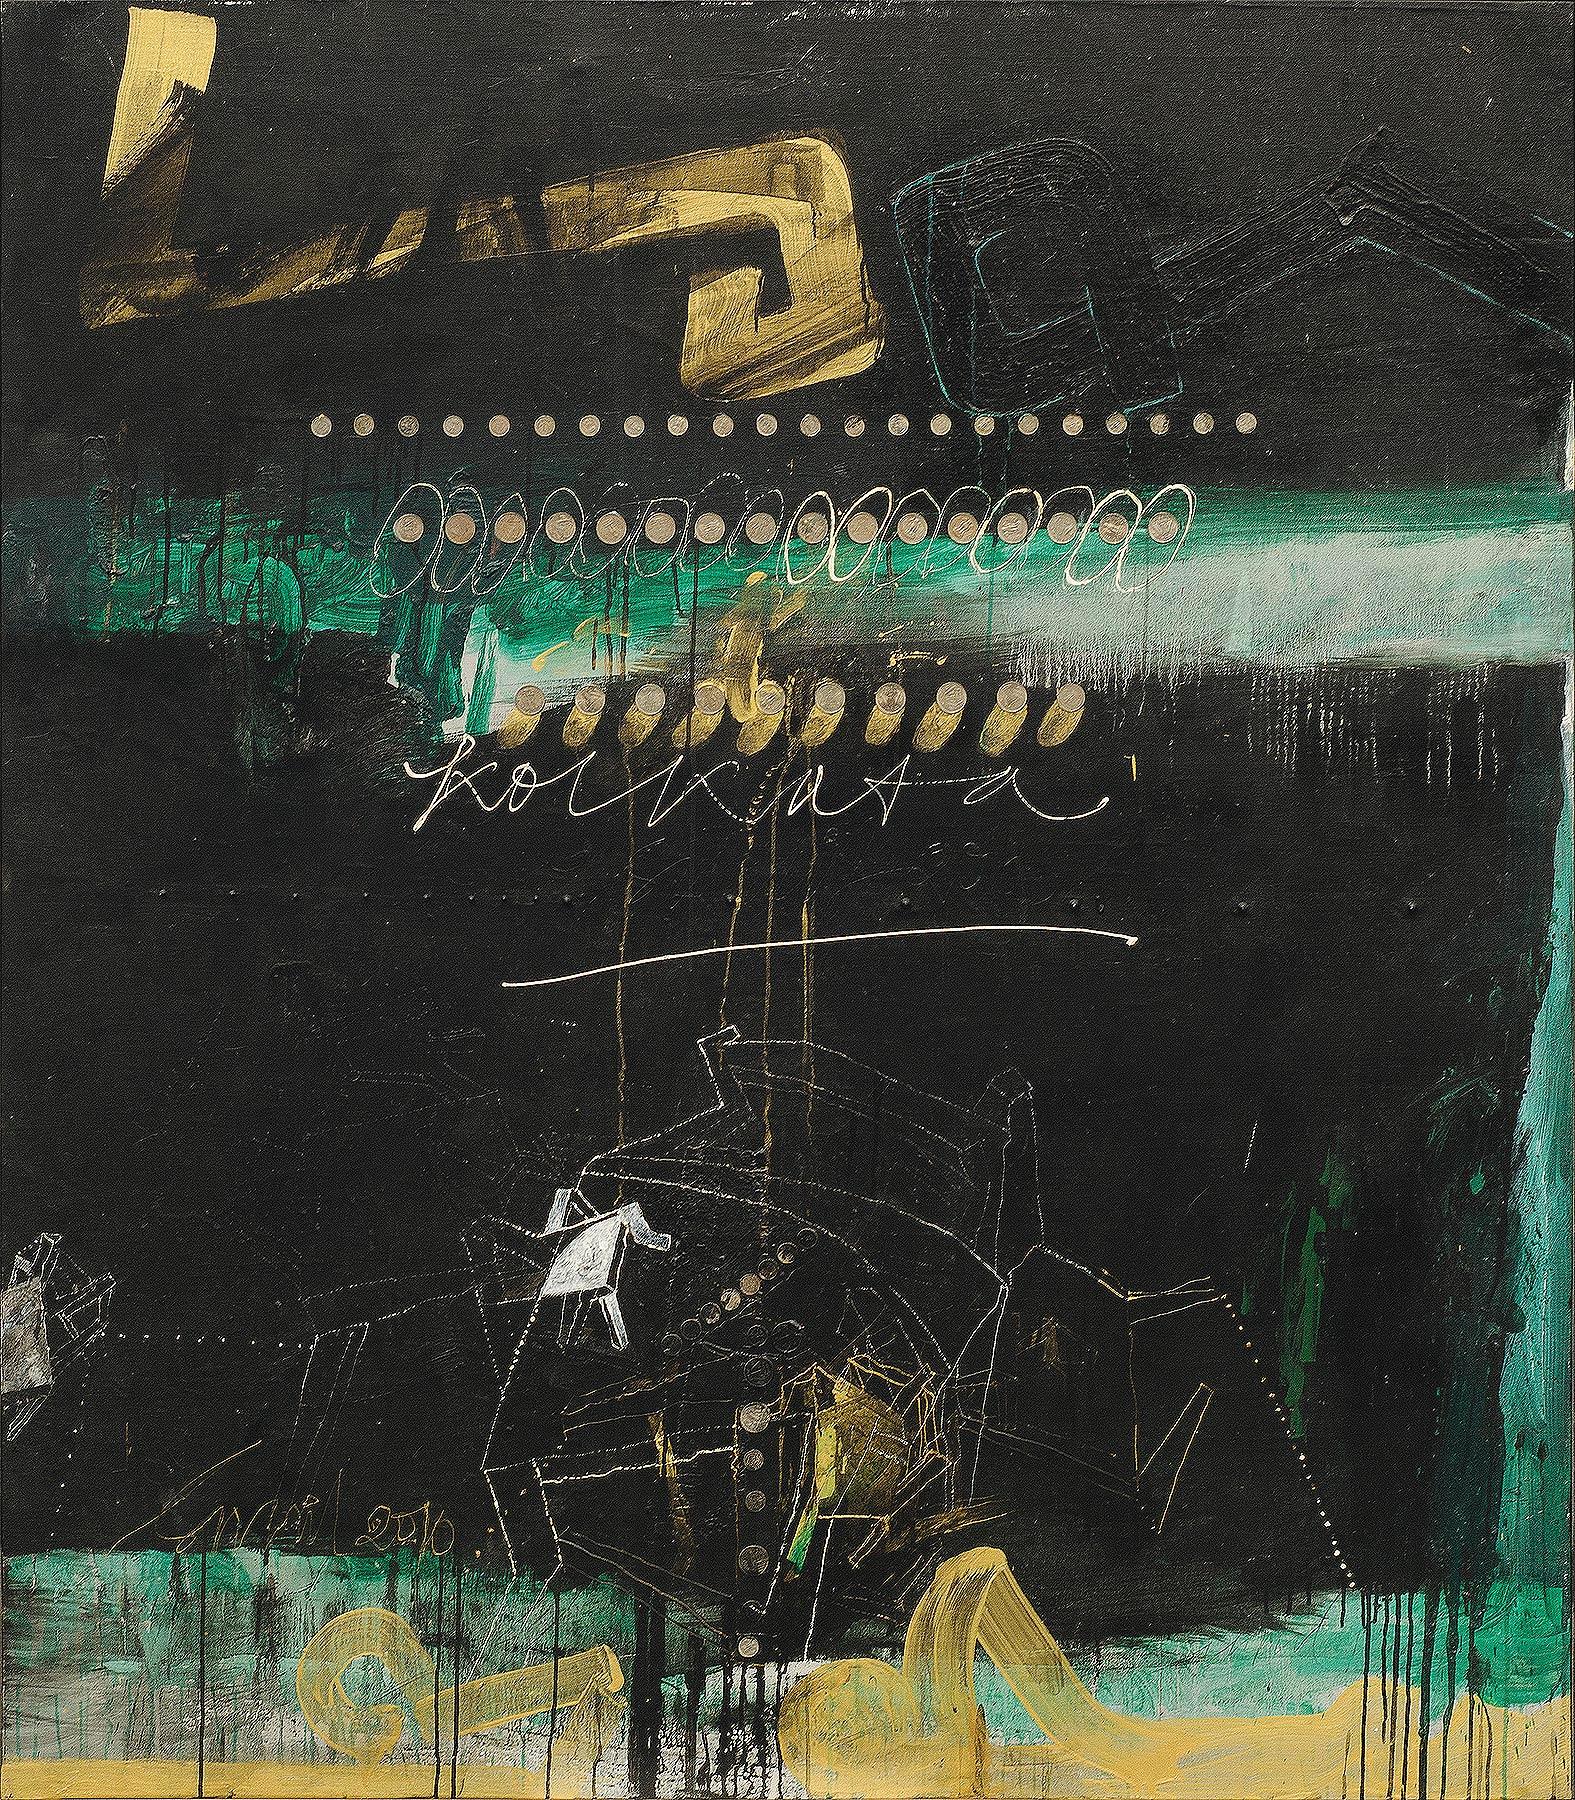 Sunil Das Interior Painting - Abstract Art, Oil, Acrylic, Coins on Canvas, Green, Black, Gold colors"In Stock"